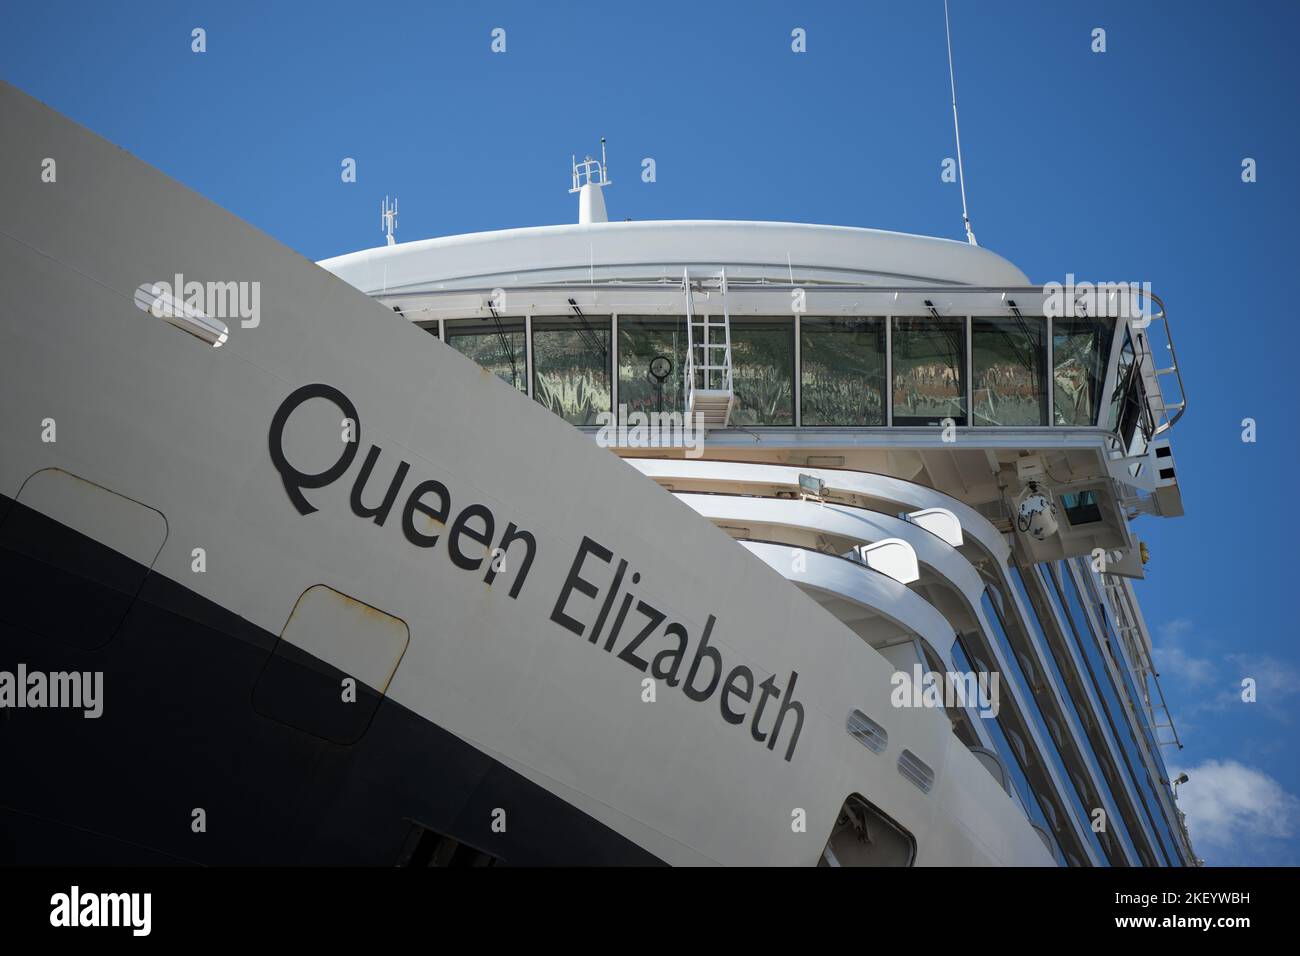 The Bow and Bridge of the Cunard Queen Elizabeth Cruise Ship with the ships name prominent. Stock Photo